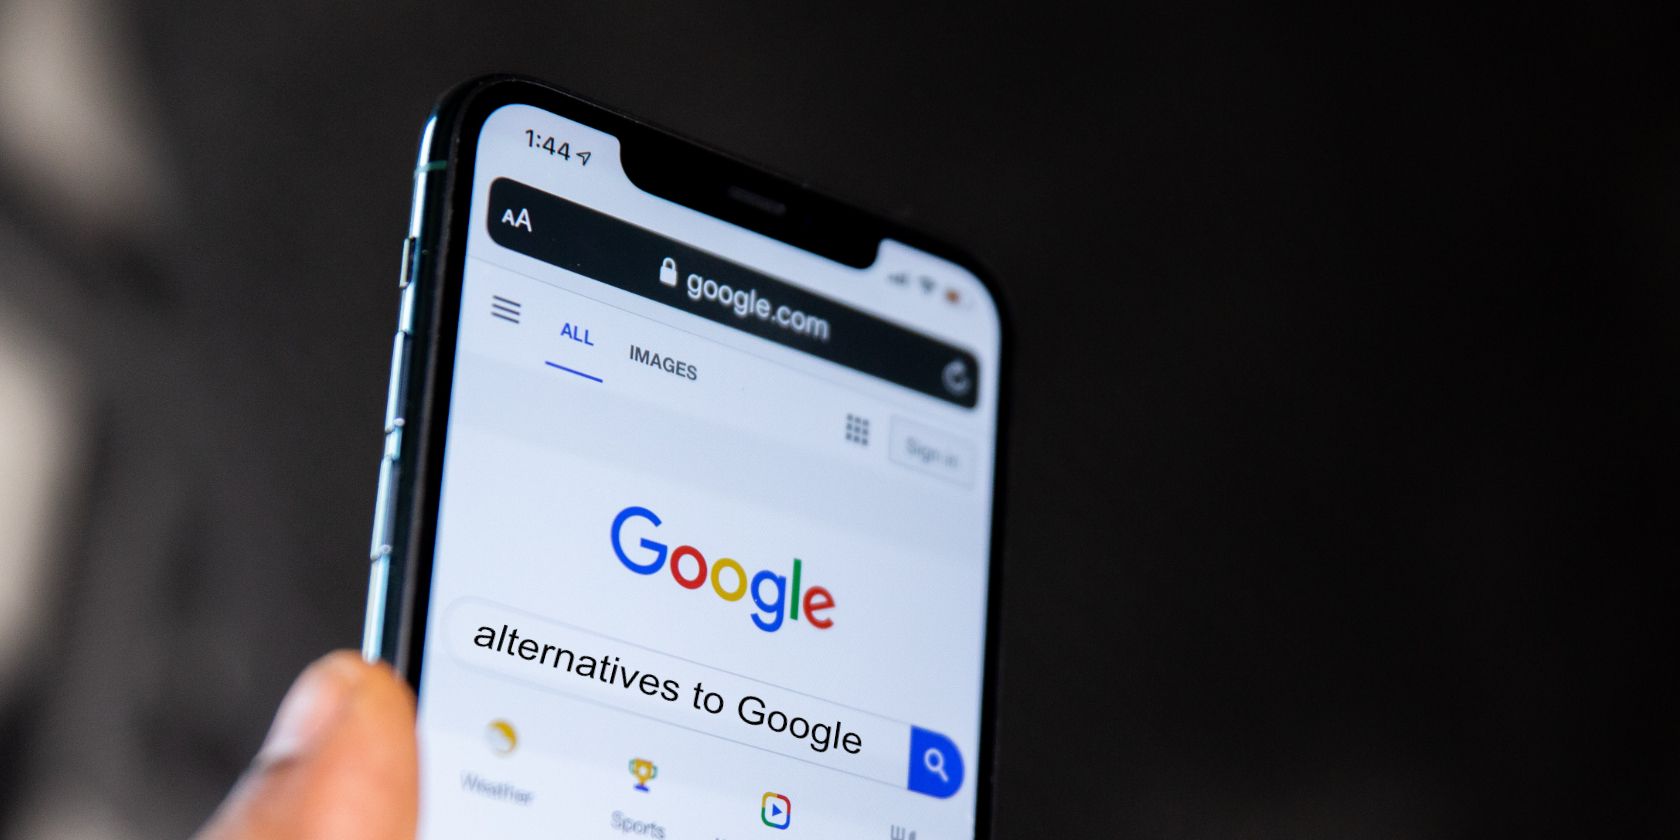 Google on an iPhone searching for alternatives